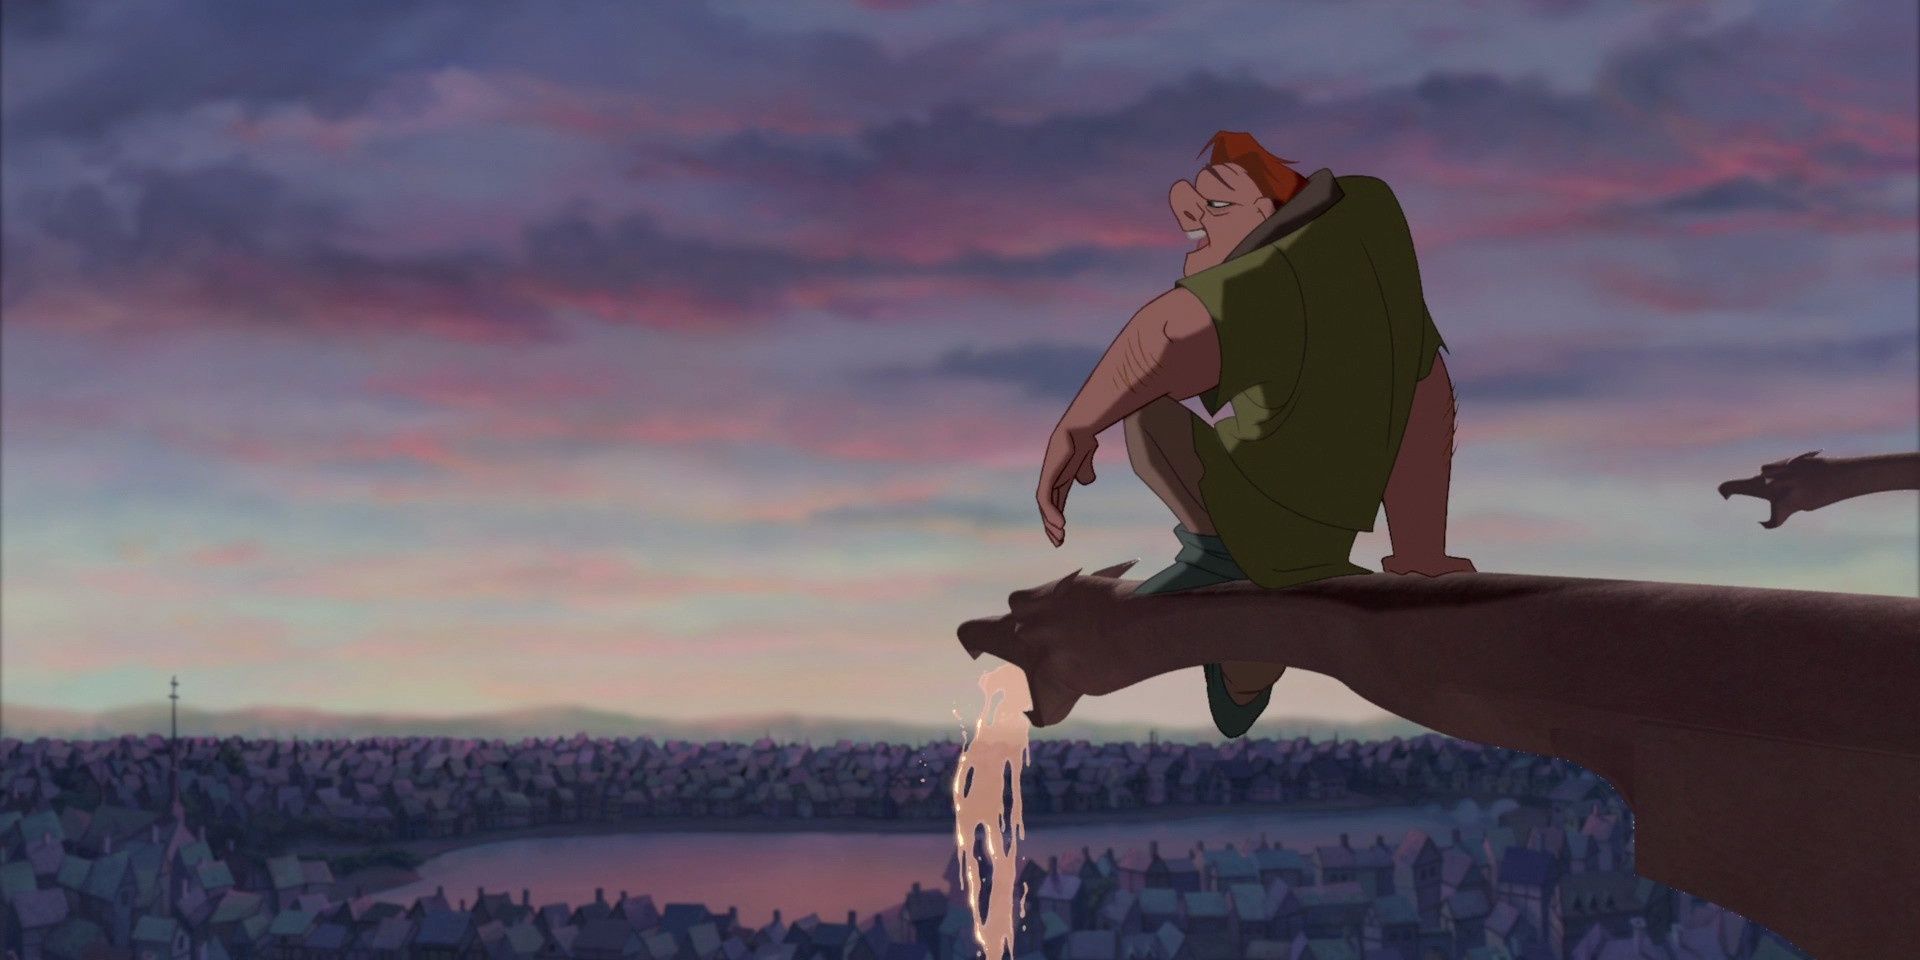 Quasimodo looking out at the town in The Hunchback of Notre Dame